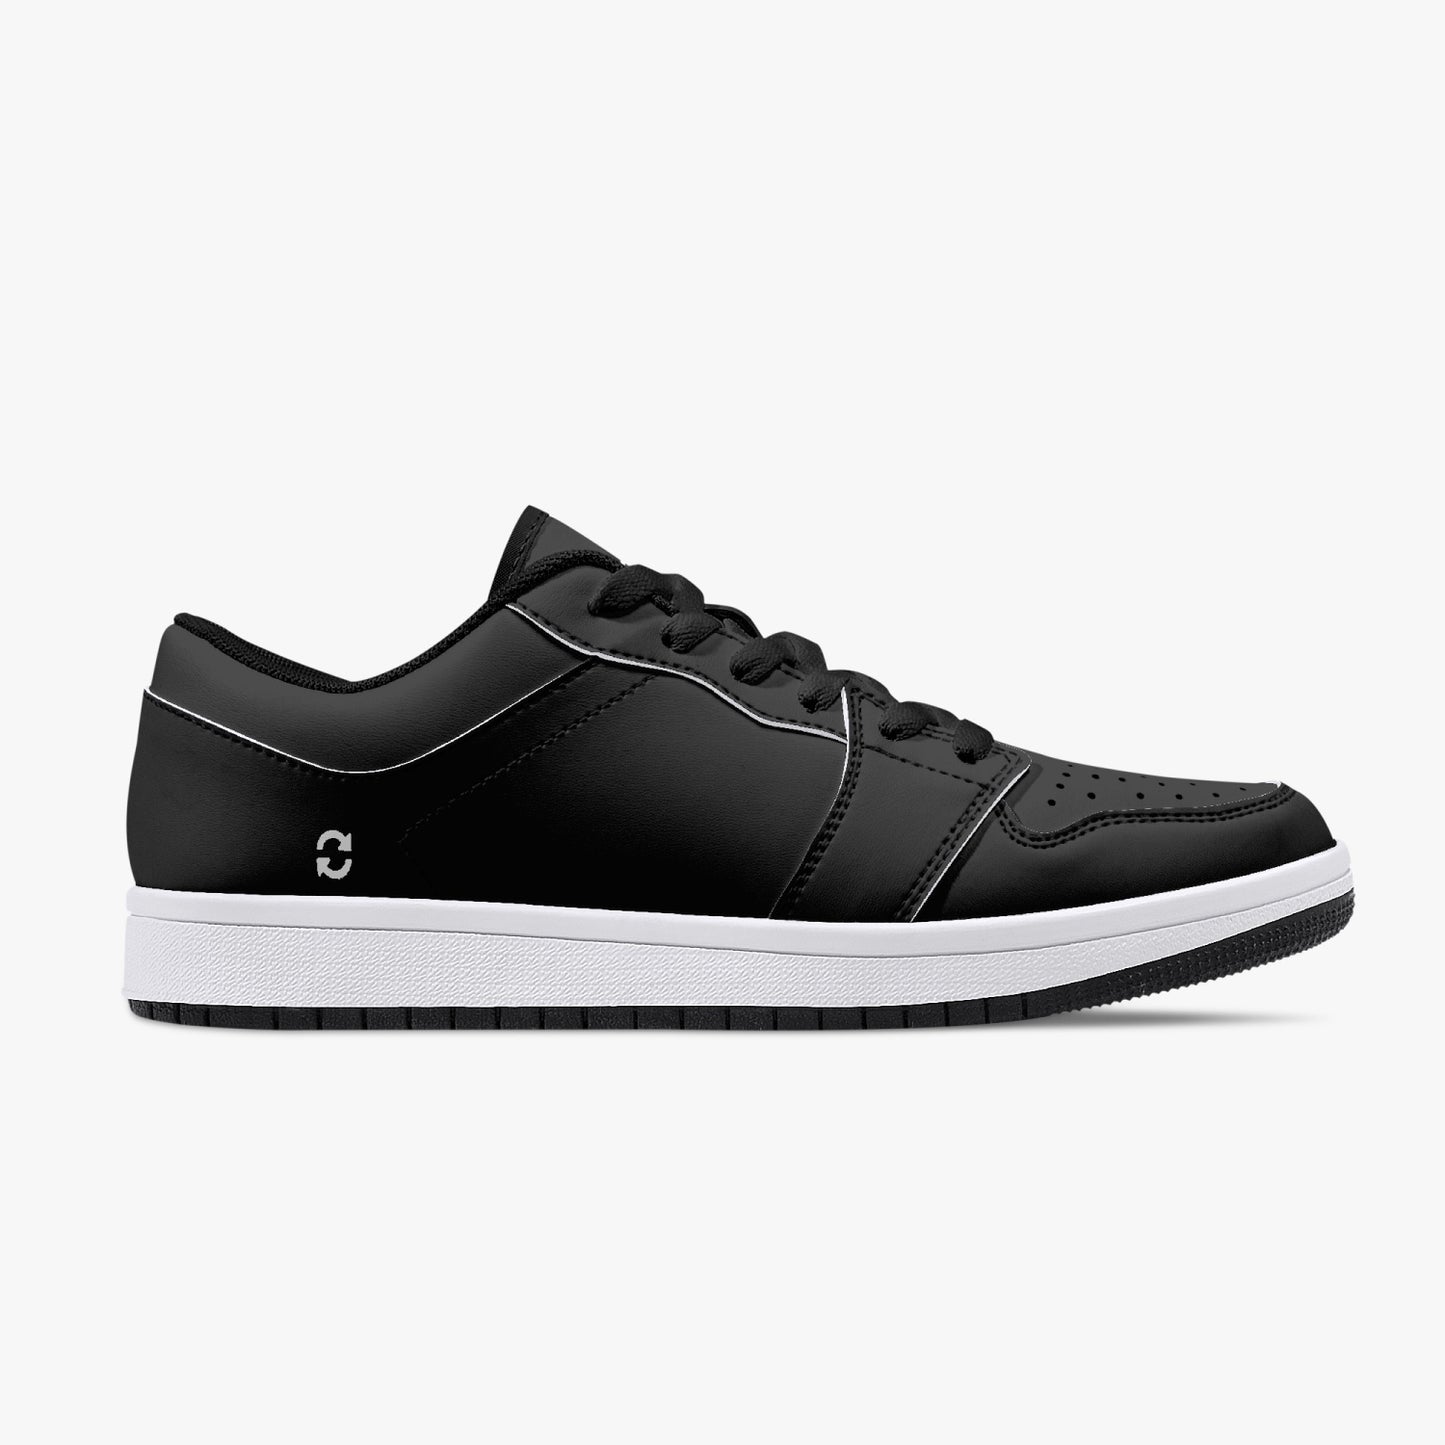 Unisex Low-Top Leather sneakers shoes - White/Black 1